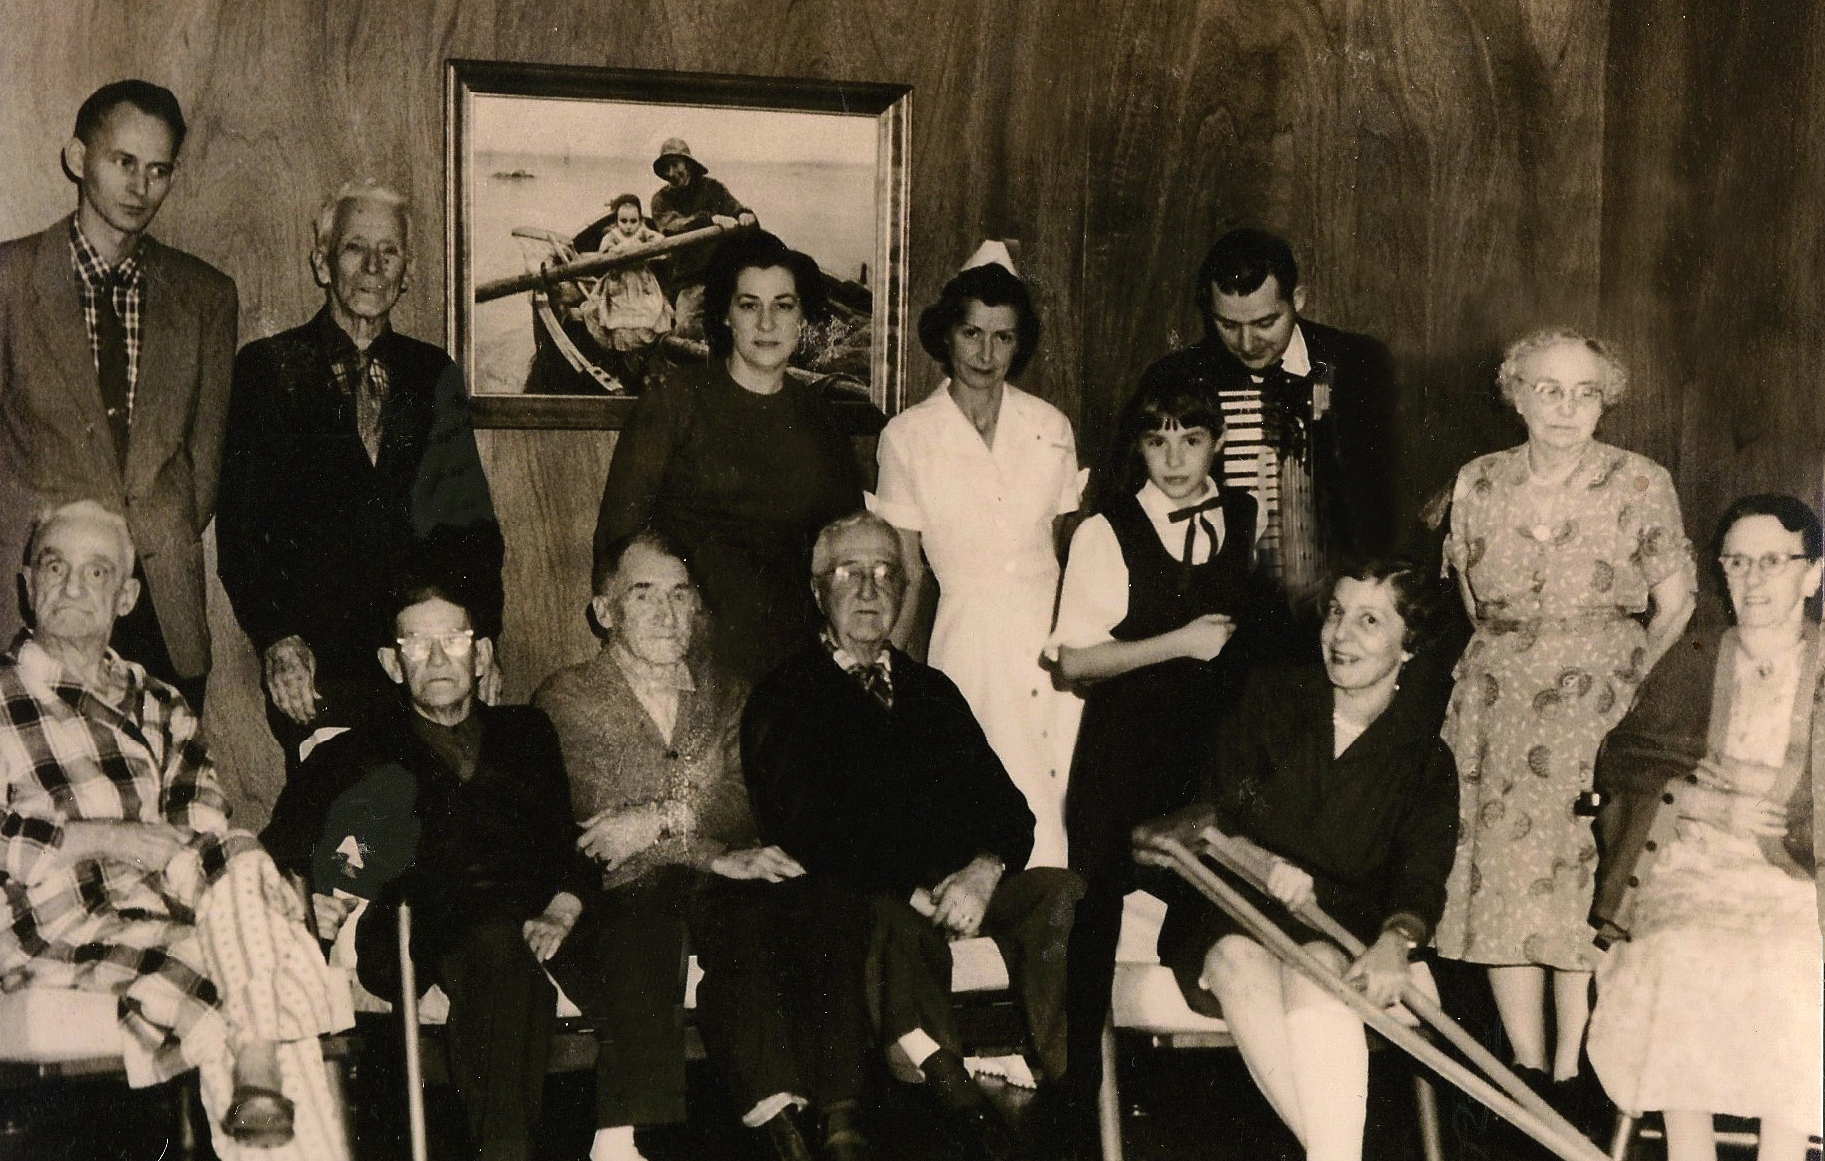 Rita M. Welch (top row; third from left) poses with residents and staff at John Scott House circa 1961.